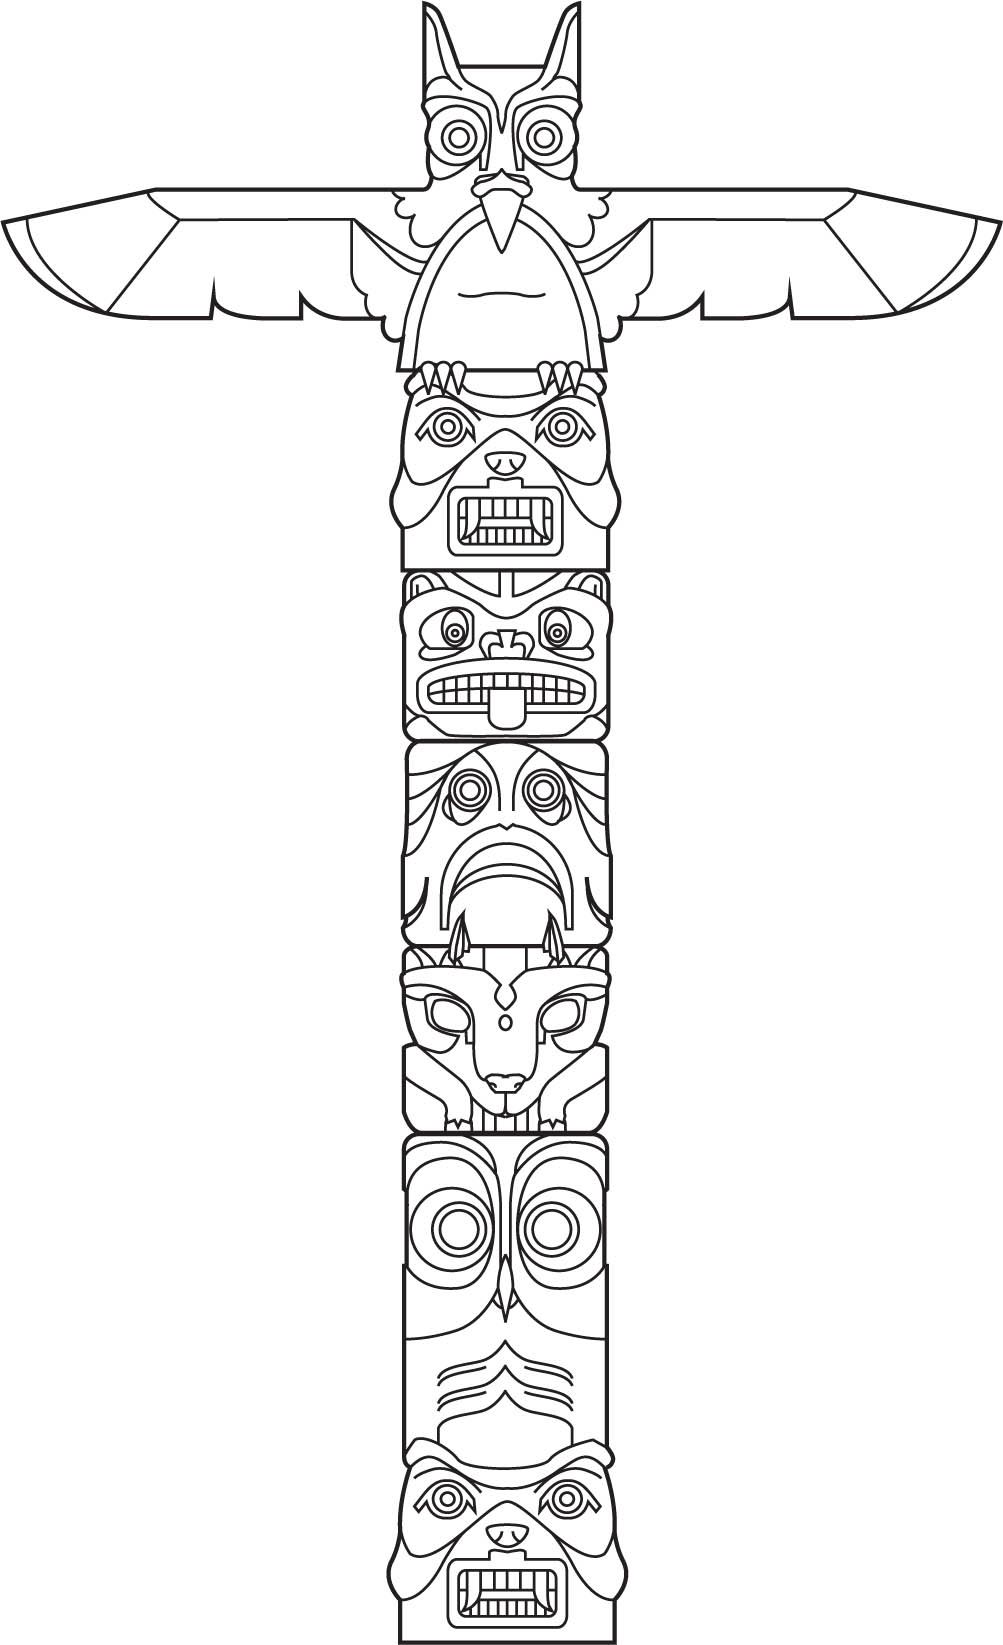 Easy Totem Pole Printables Coloring Pages Of Totem Pole.